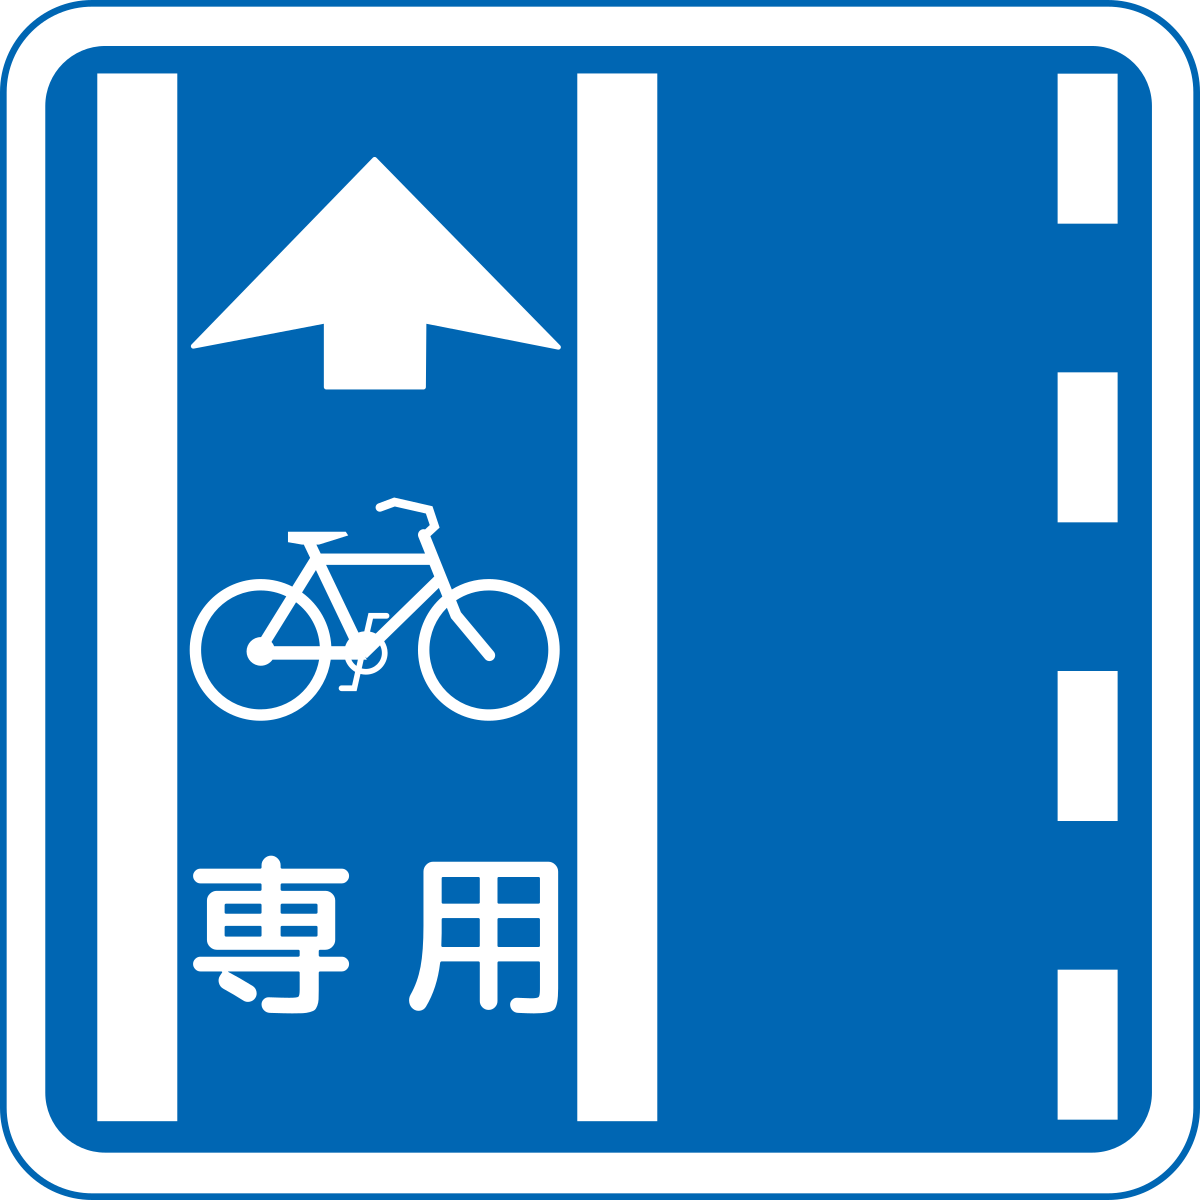 File:Japanese road sign 327-4-2.svg - Wikipedia